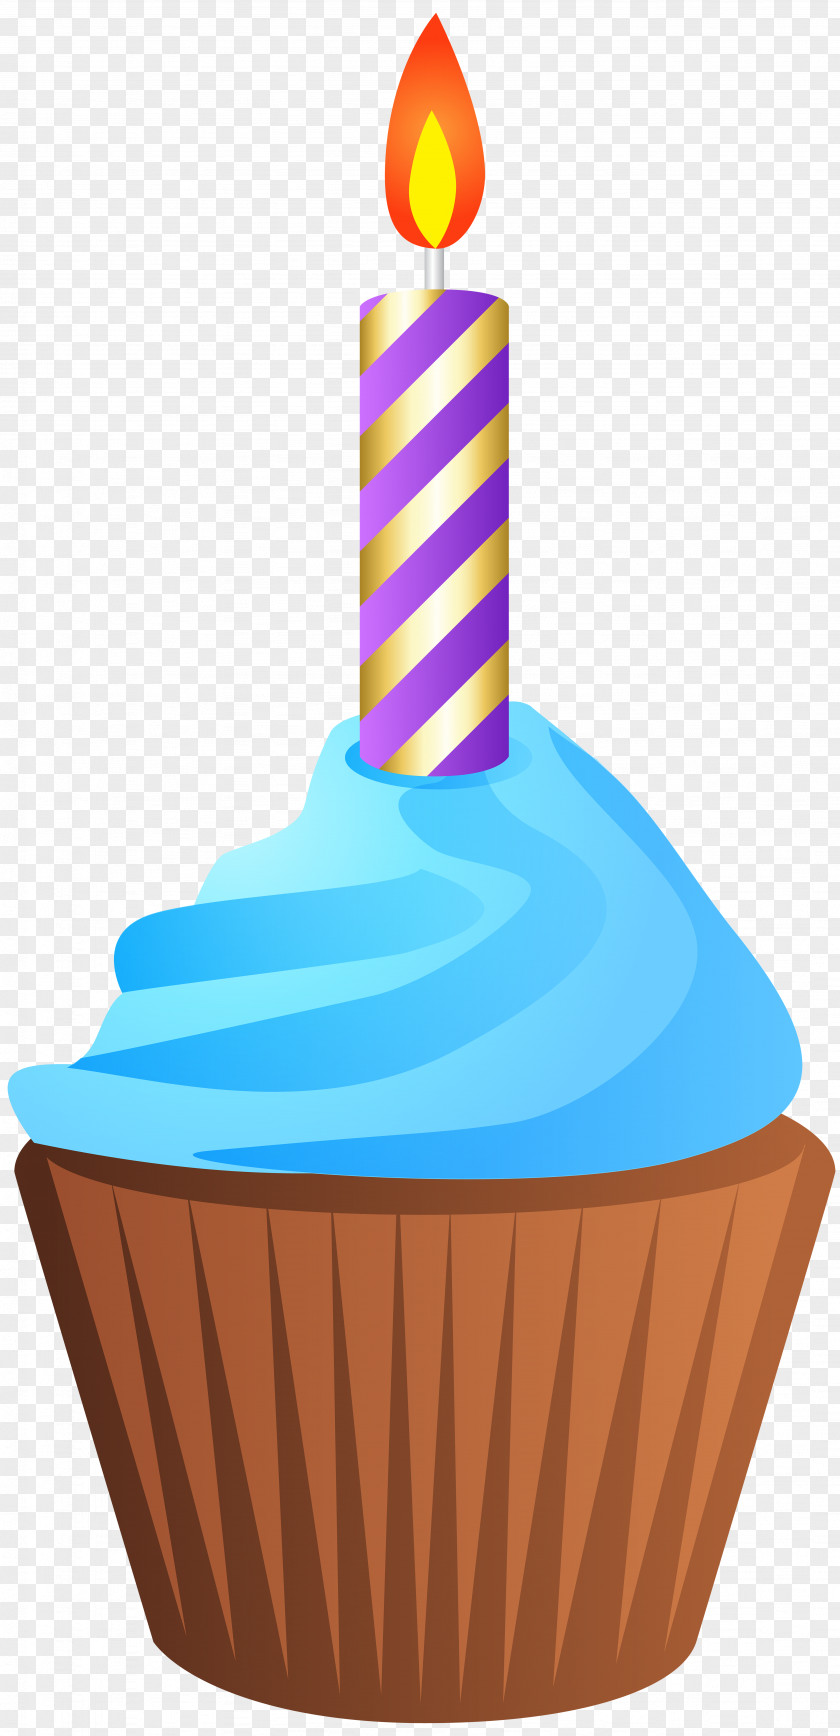 Candles Birthday Cake Muffin Cupcake Clip Art PNG